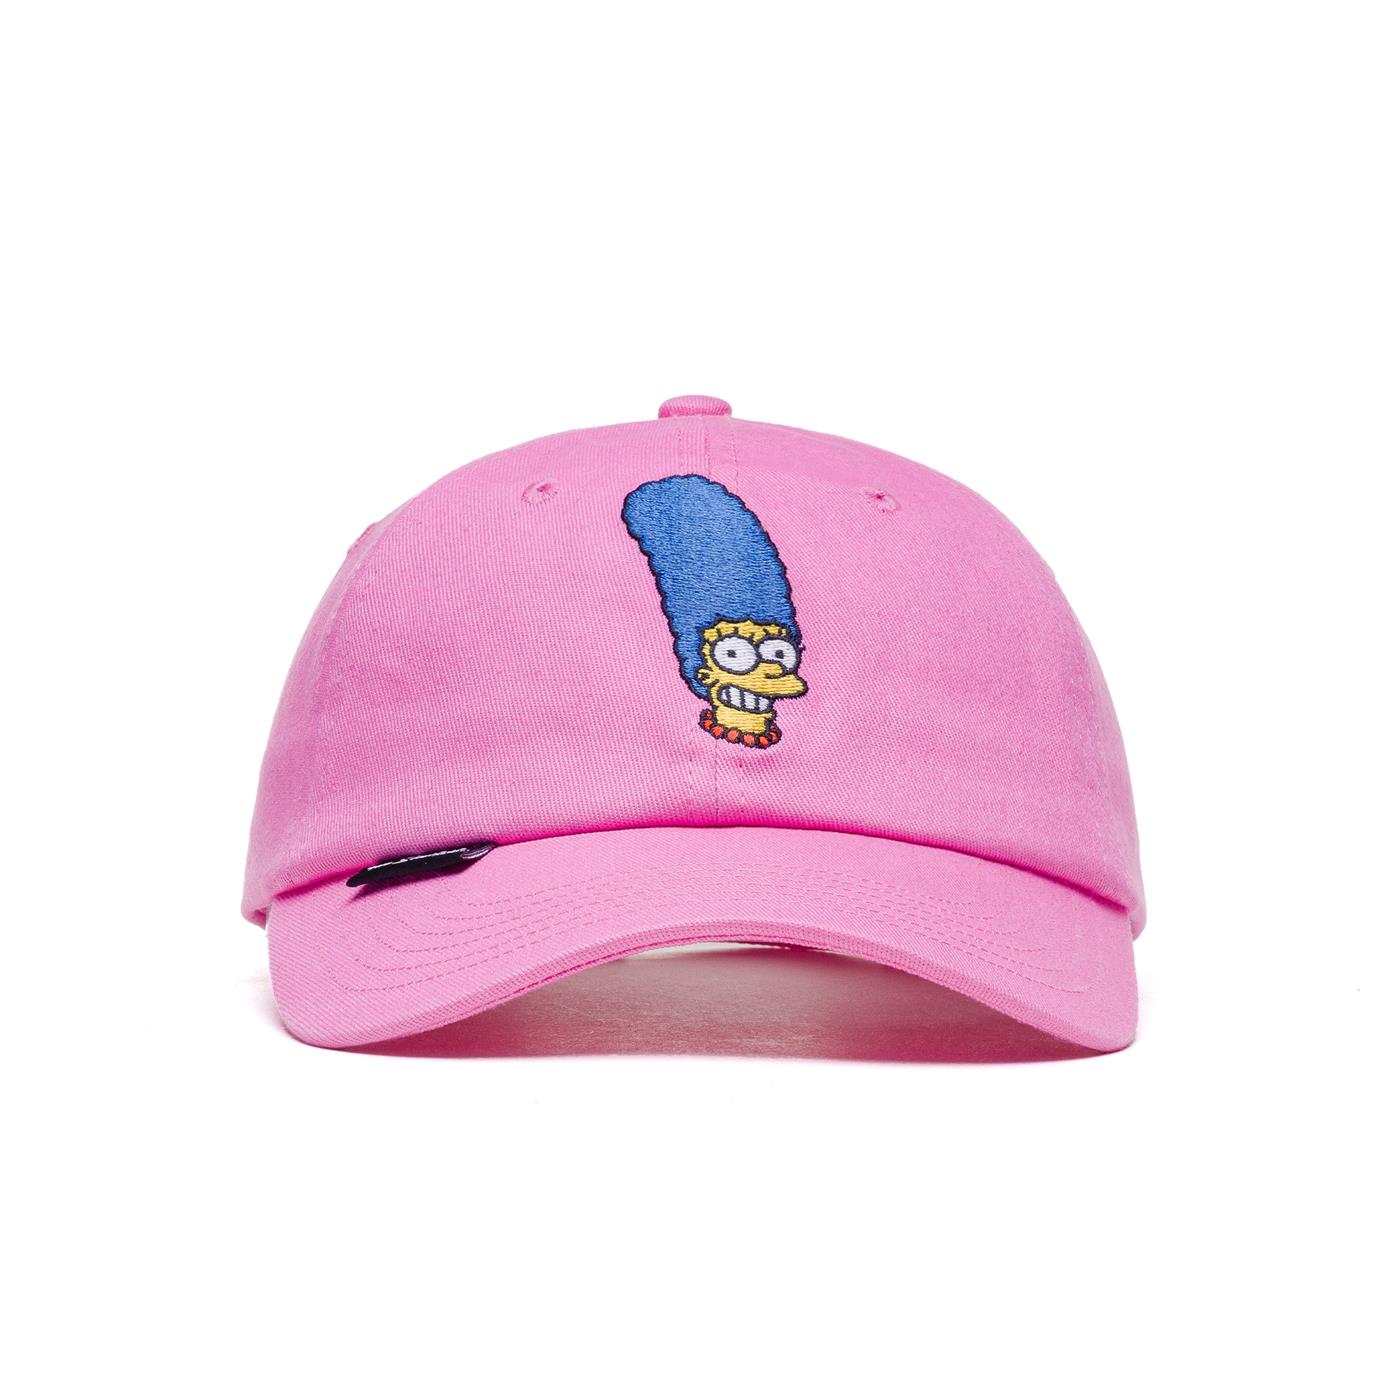 1824 Cap HERSCHEL SUPPLY CO. The Simpsons Sylas Classics Cap Pink for  Unisex RvceShops 1167 Protect your whole wardrobe from your hat to  your shoes